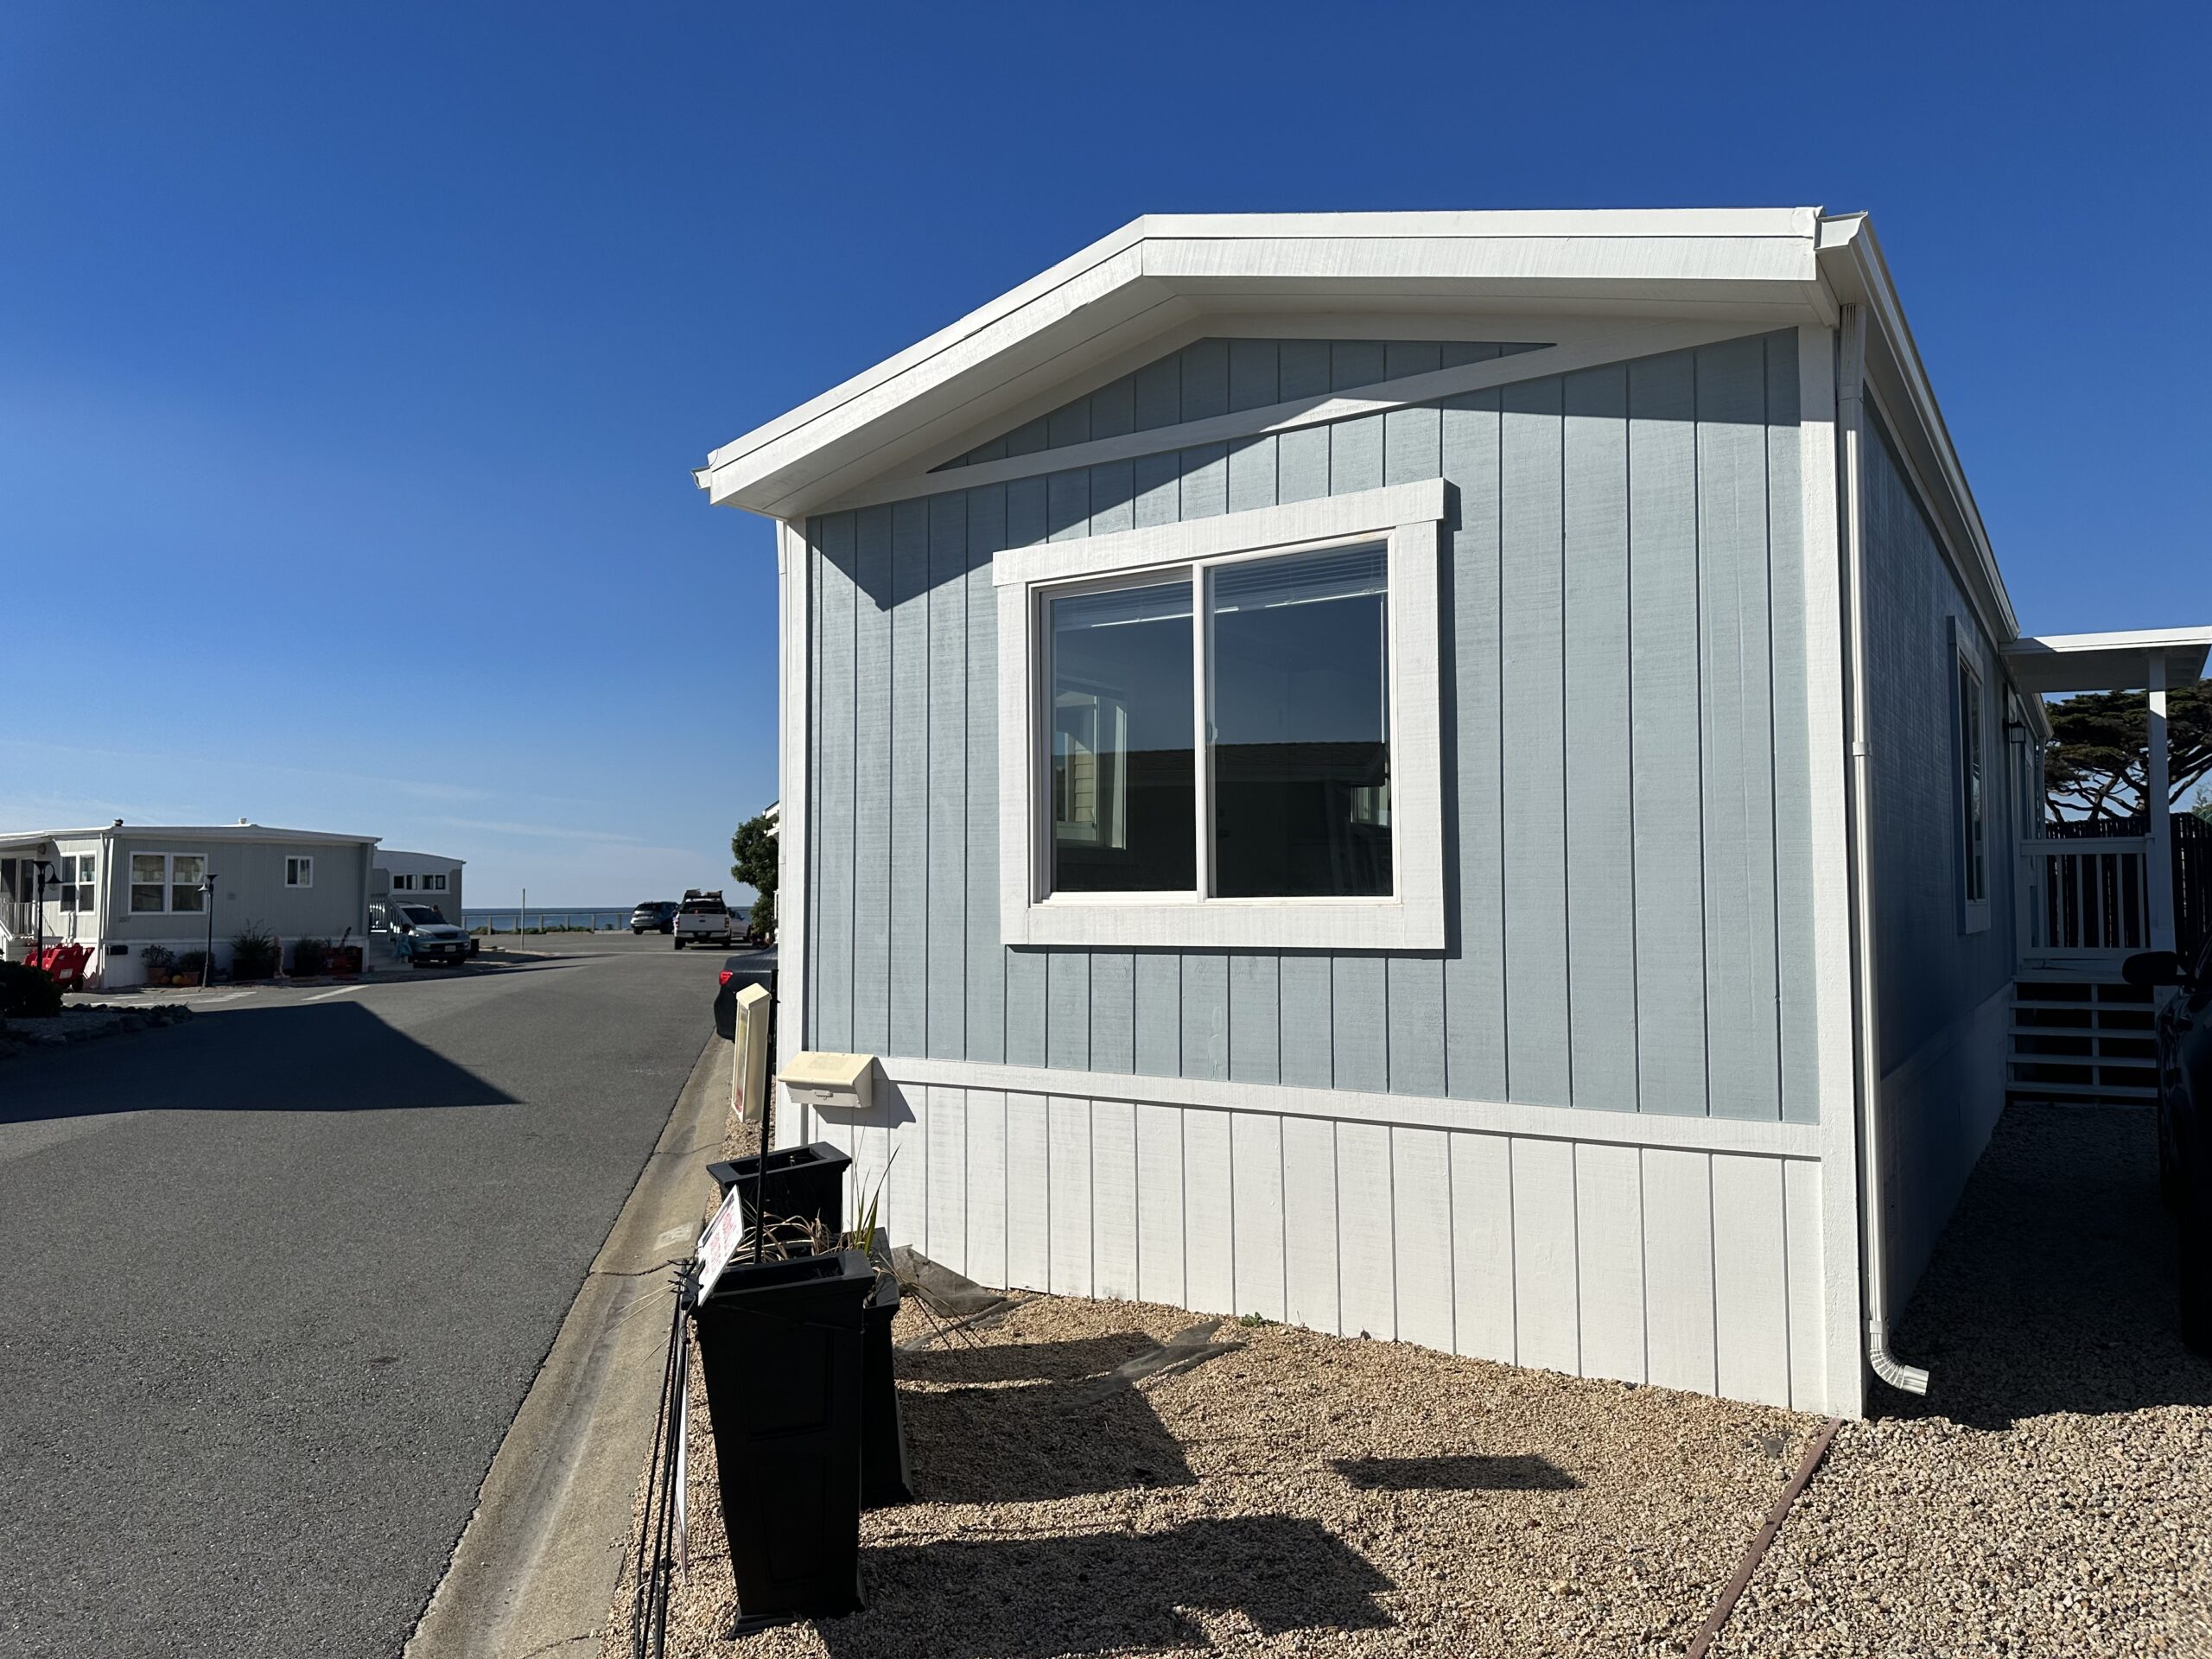 Light blue mobile home with white trim and clear skies, situated in a residential area with a street view.